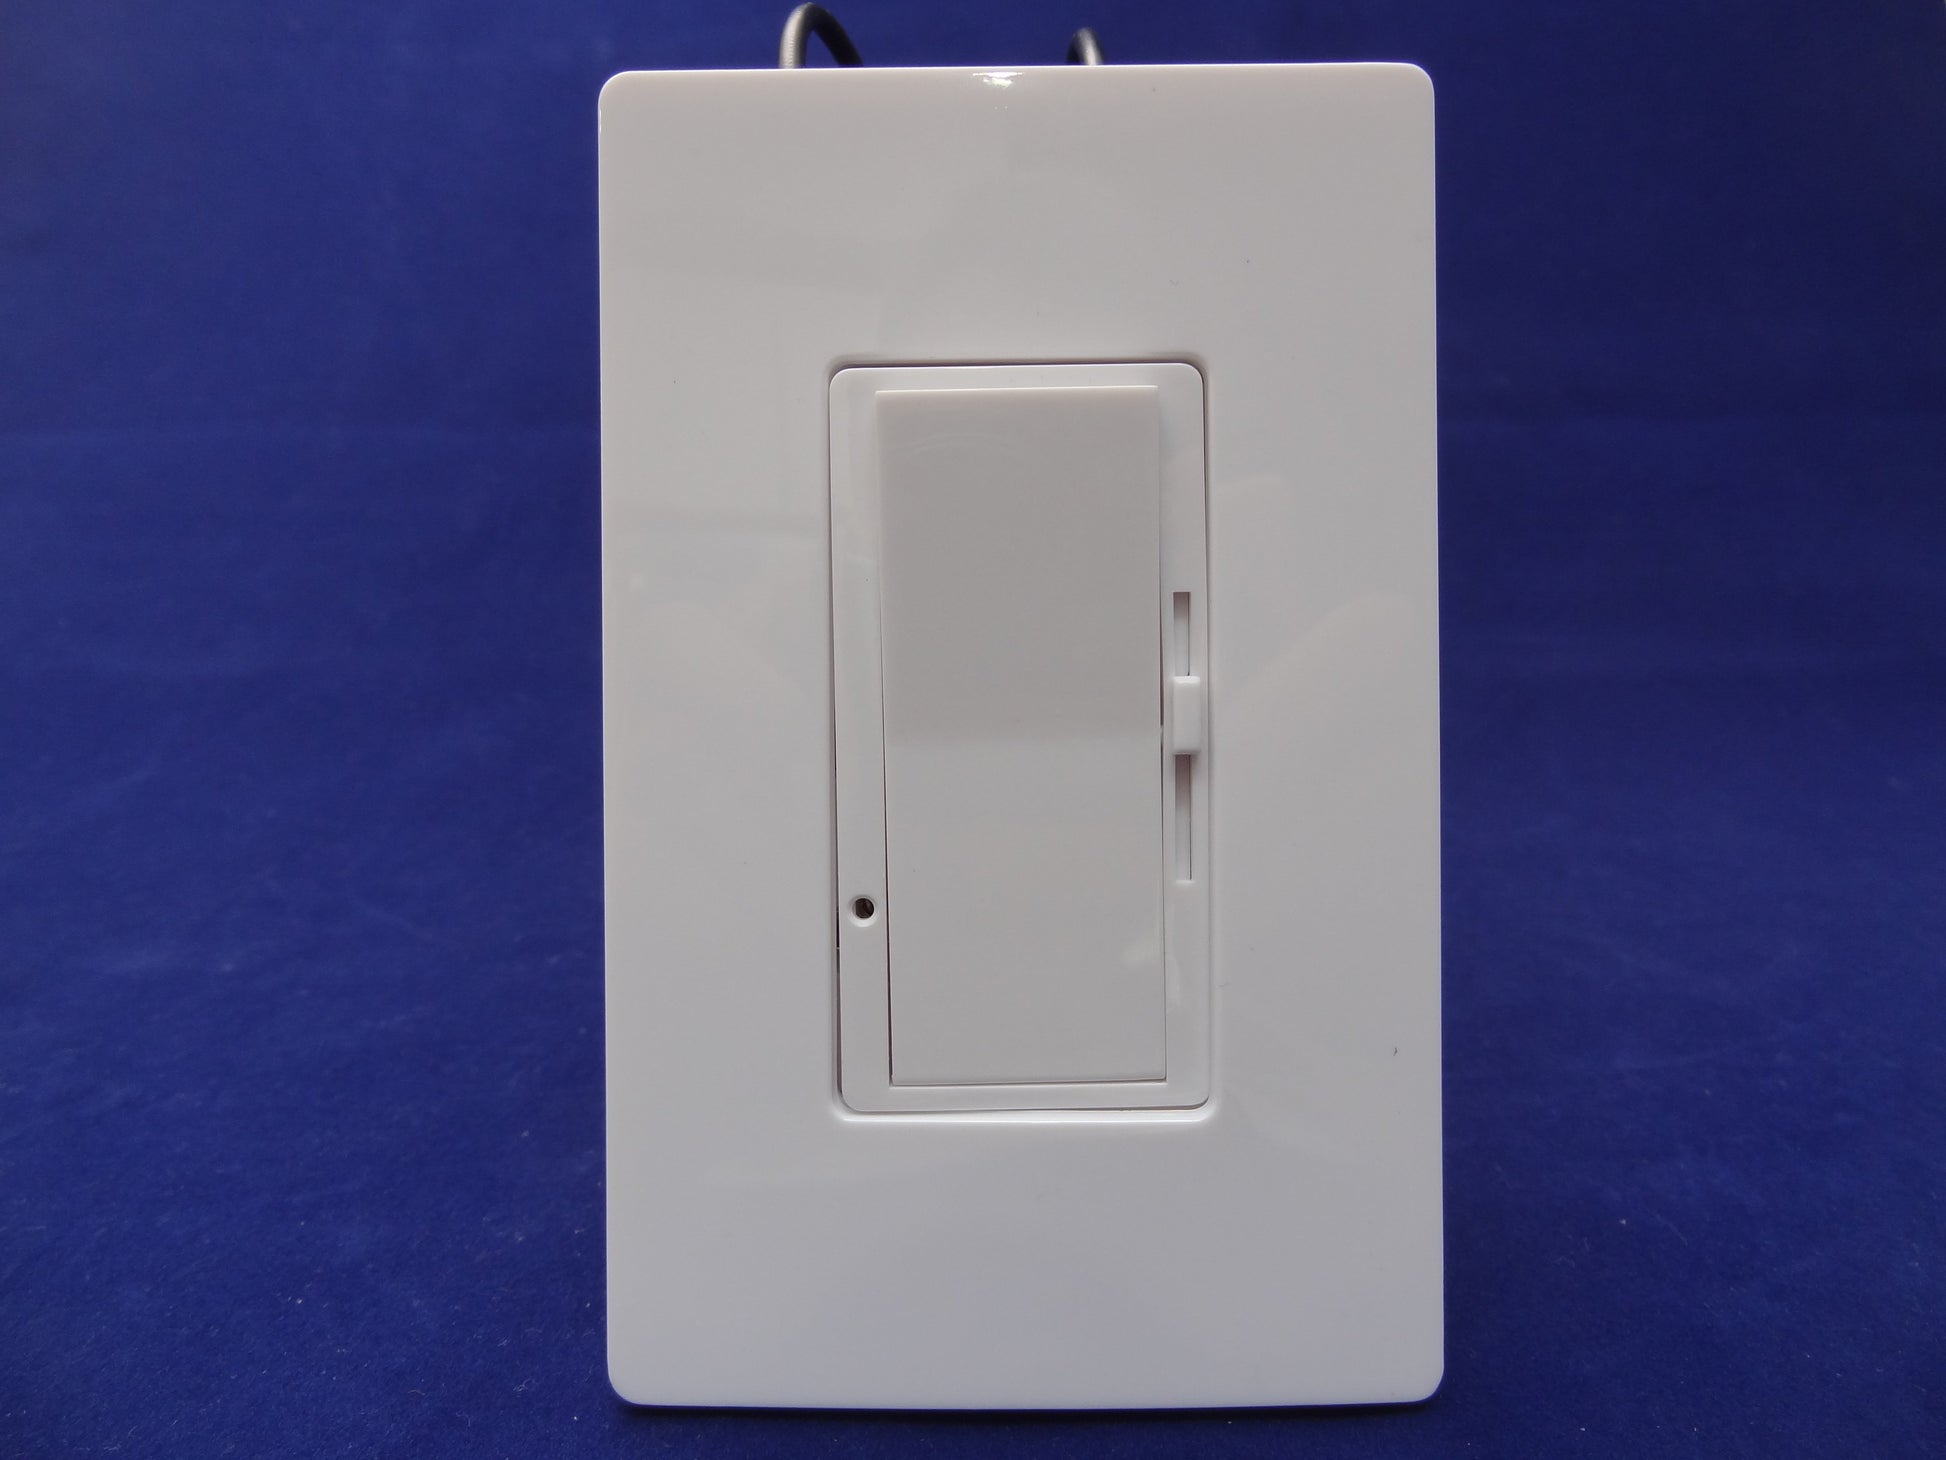 Dimmer LED Switch Light 10 pack: Canada Certified Single Pole 150w 120v - Led Light Canada